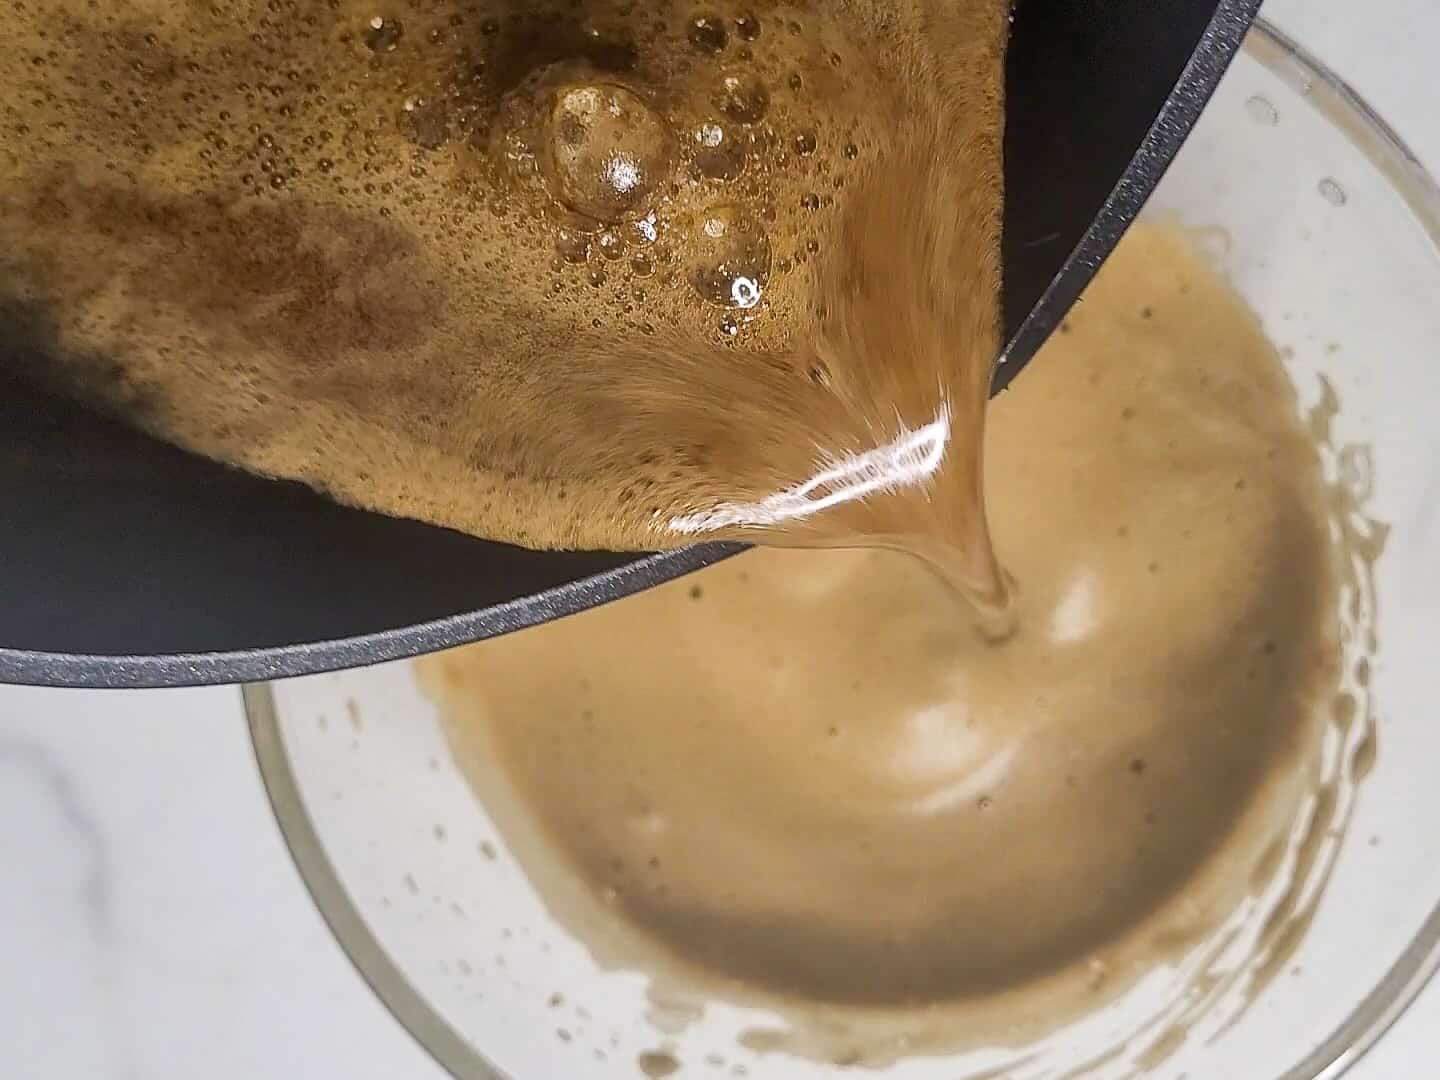 Coffee syrup being poured in a bowl